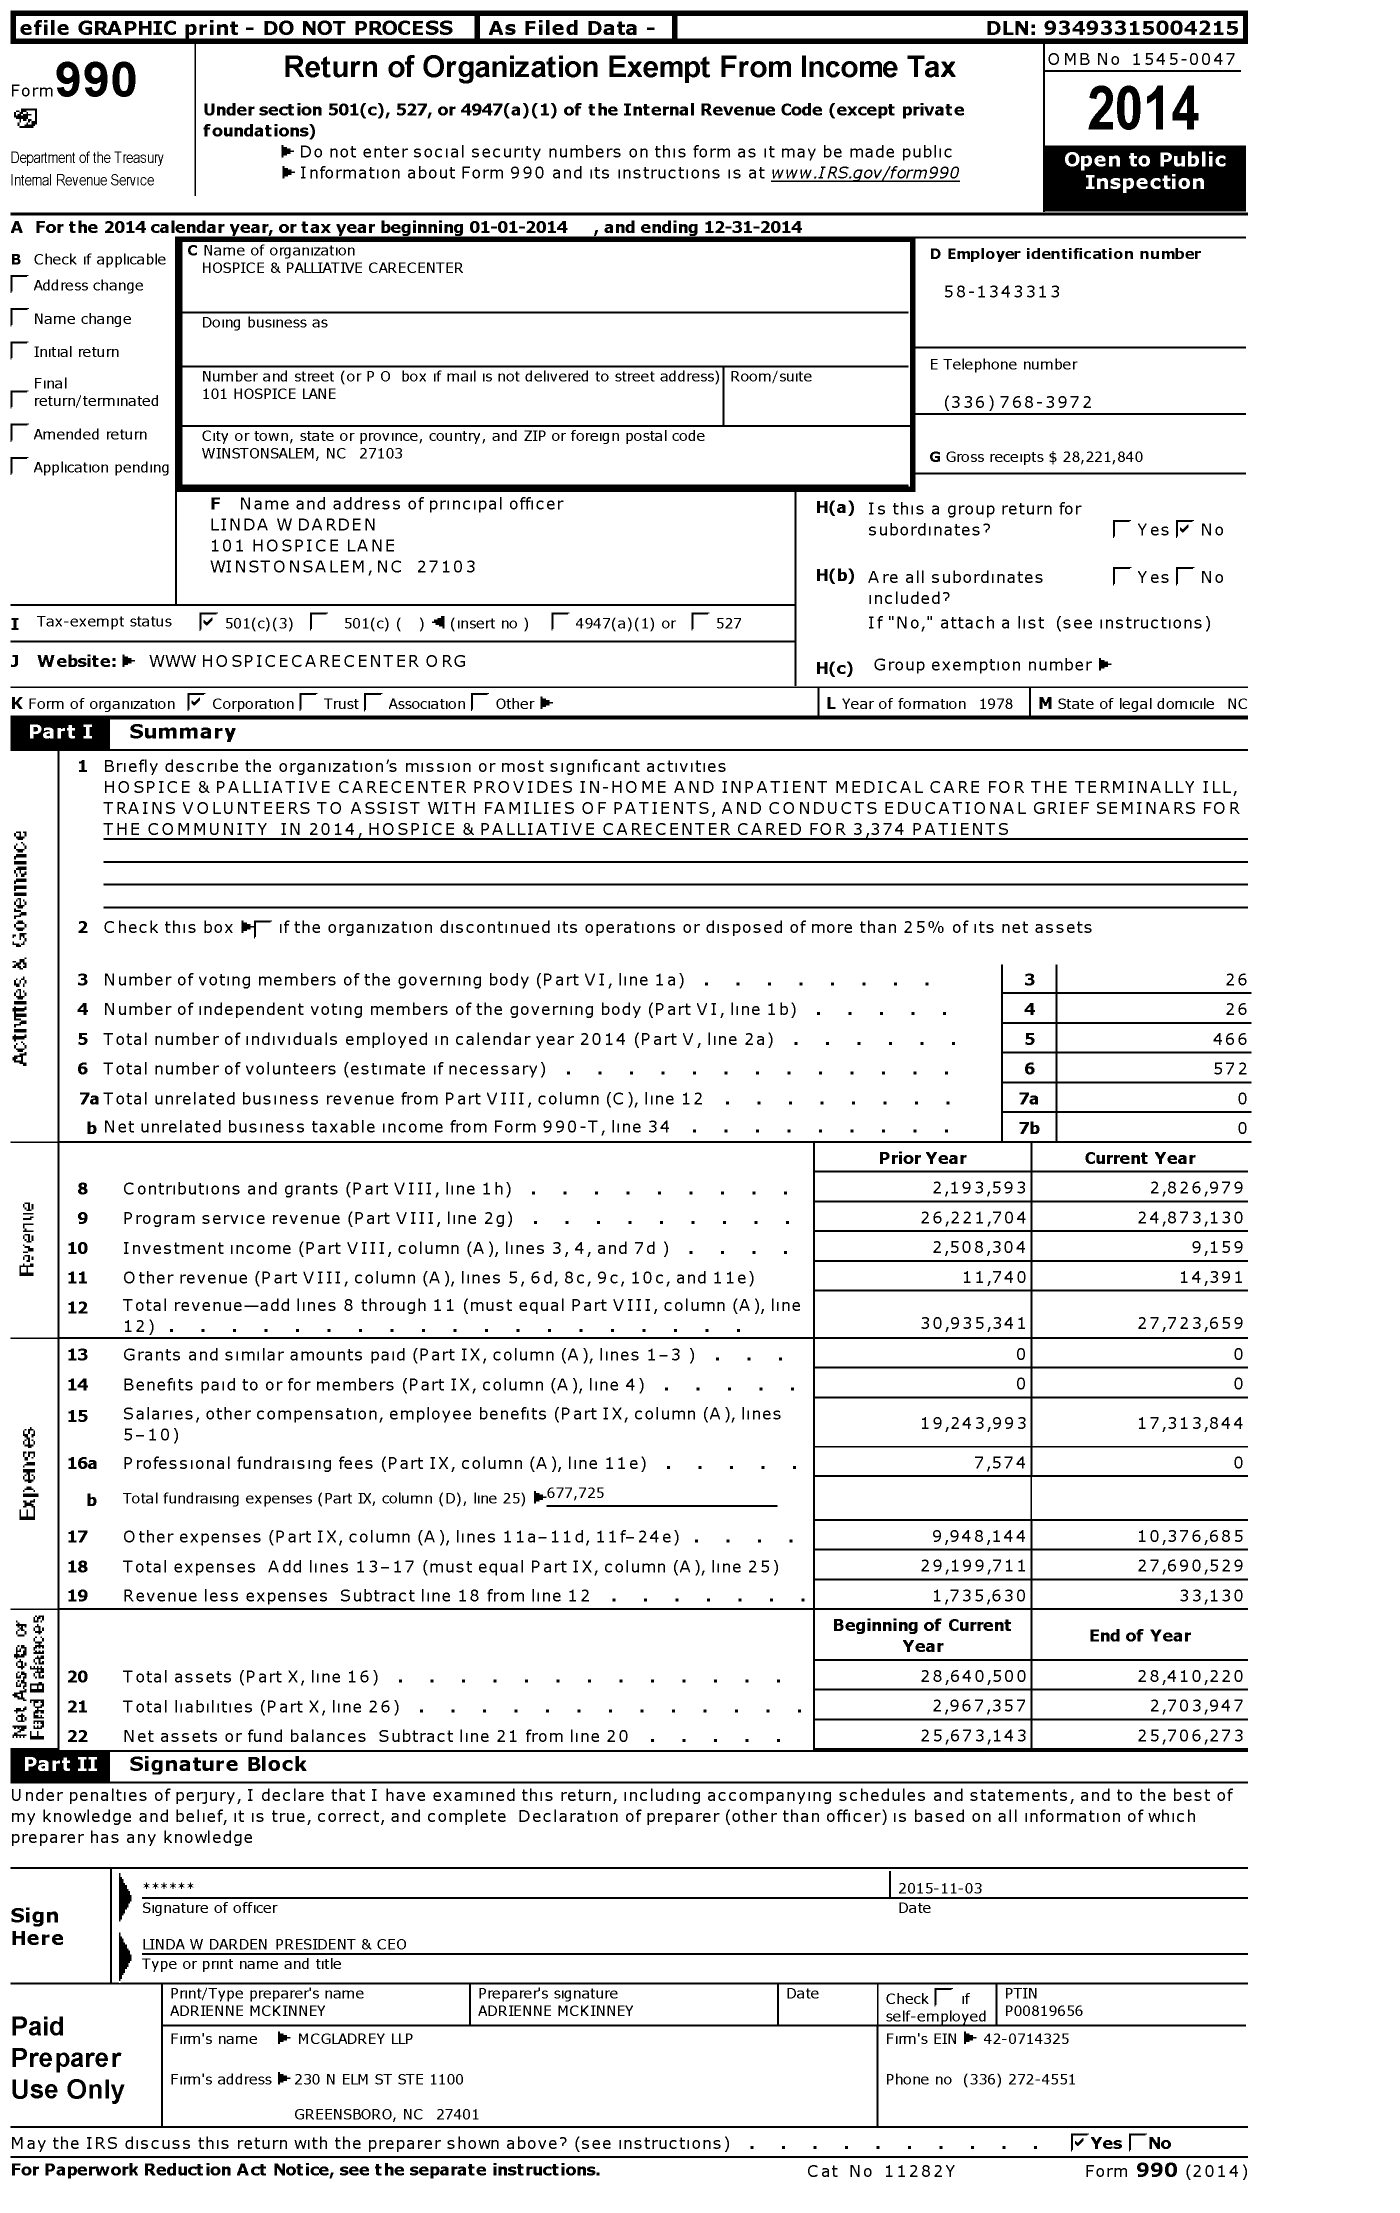 Image of first page of 2014 Form 990 for Trellis Supportive Carecenter